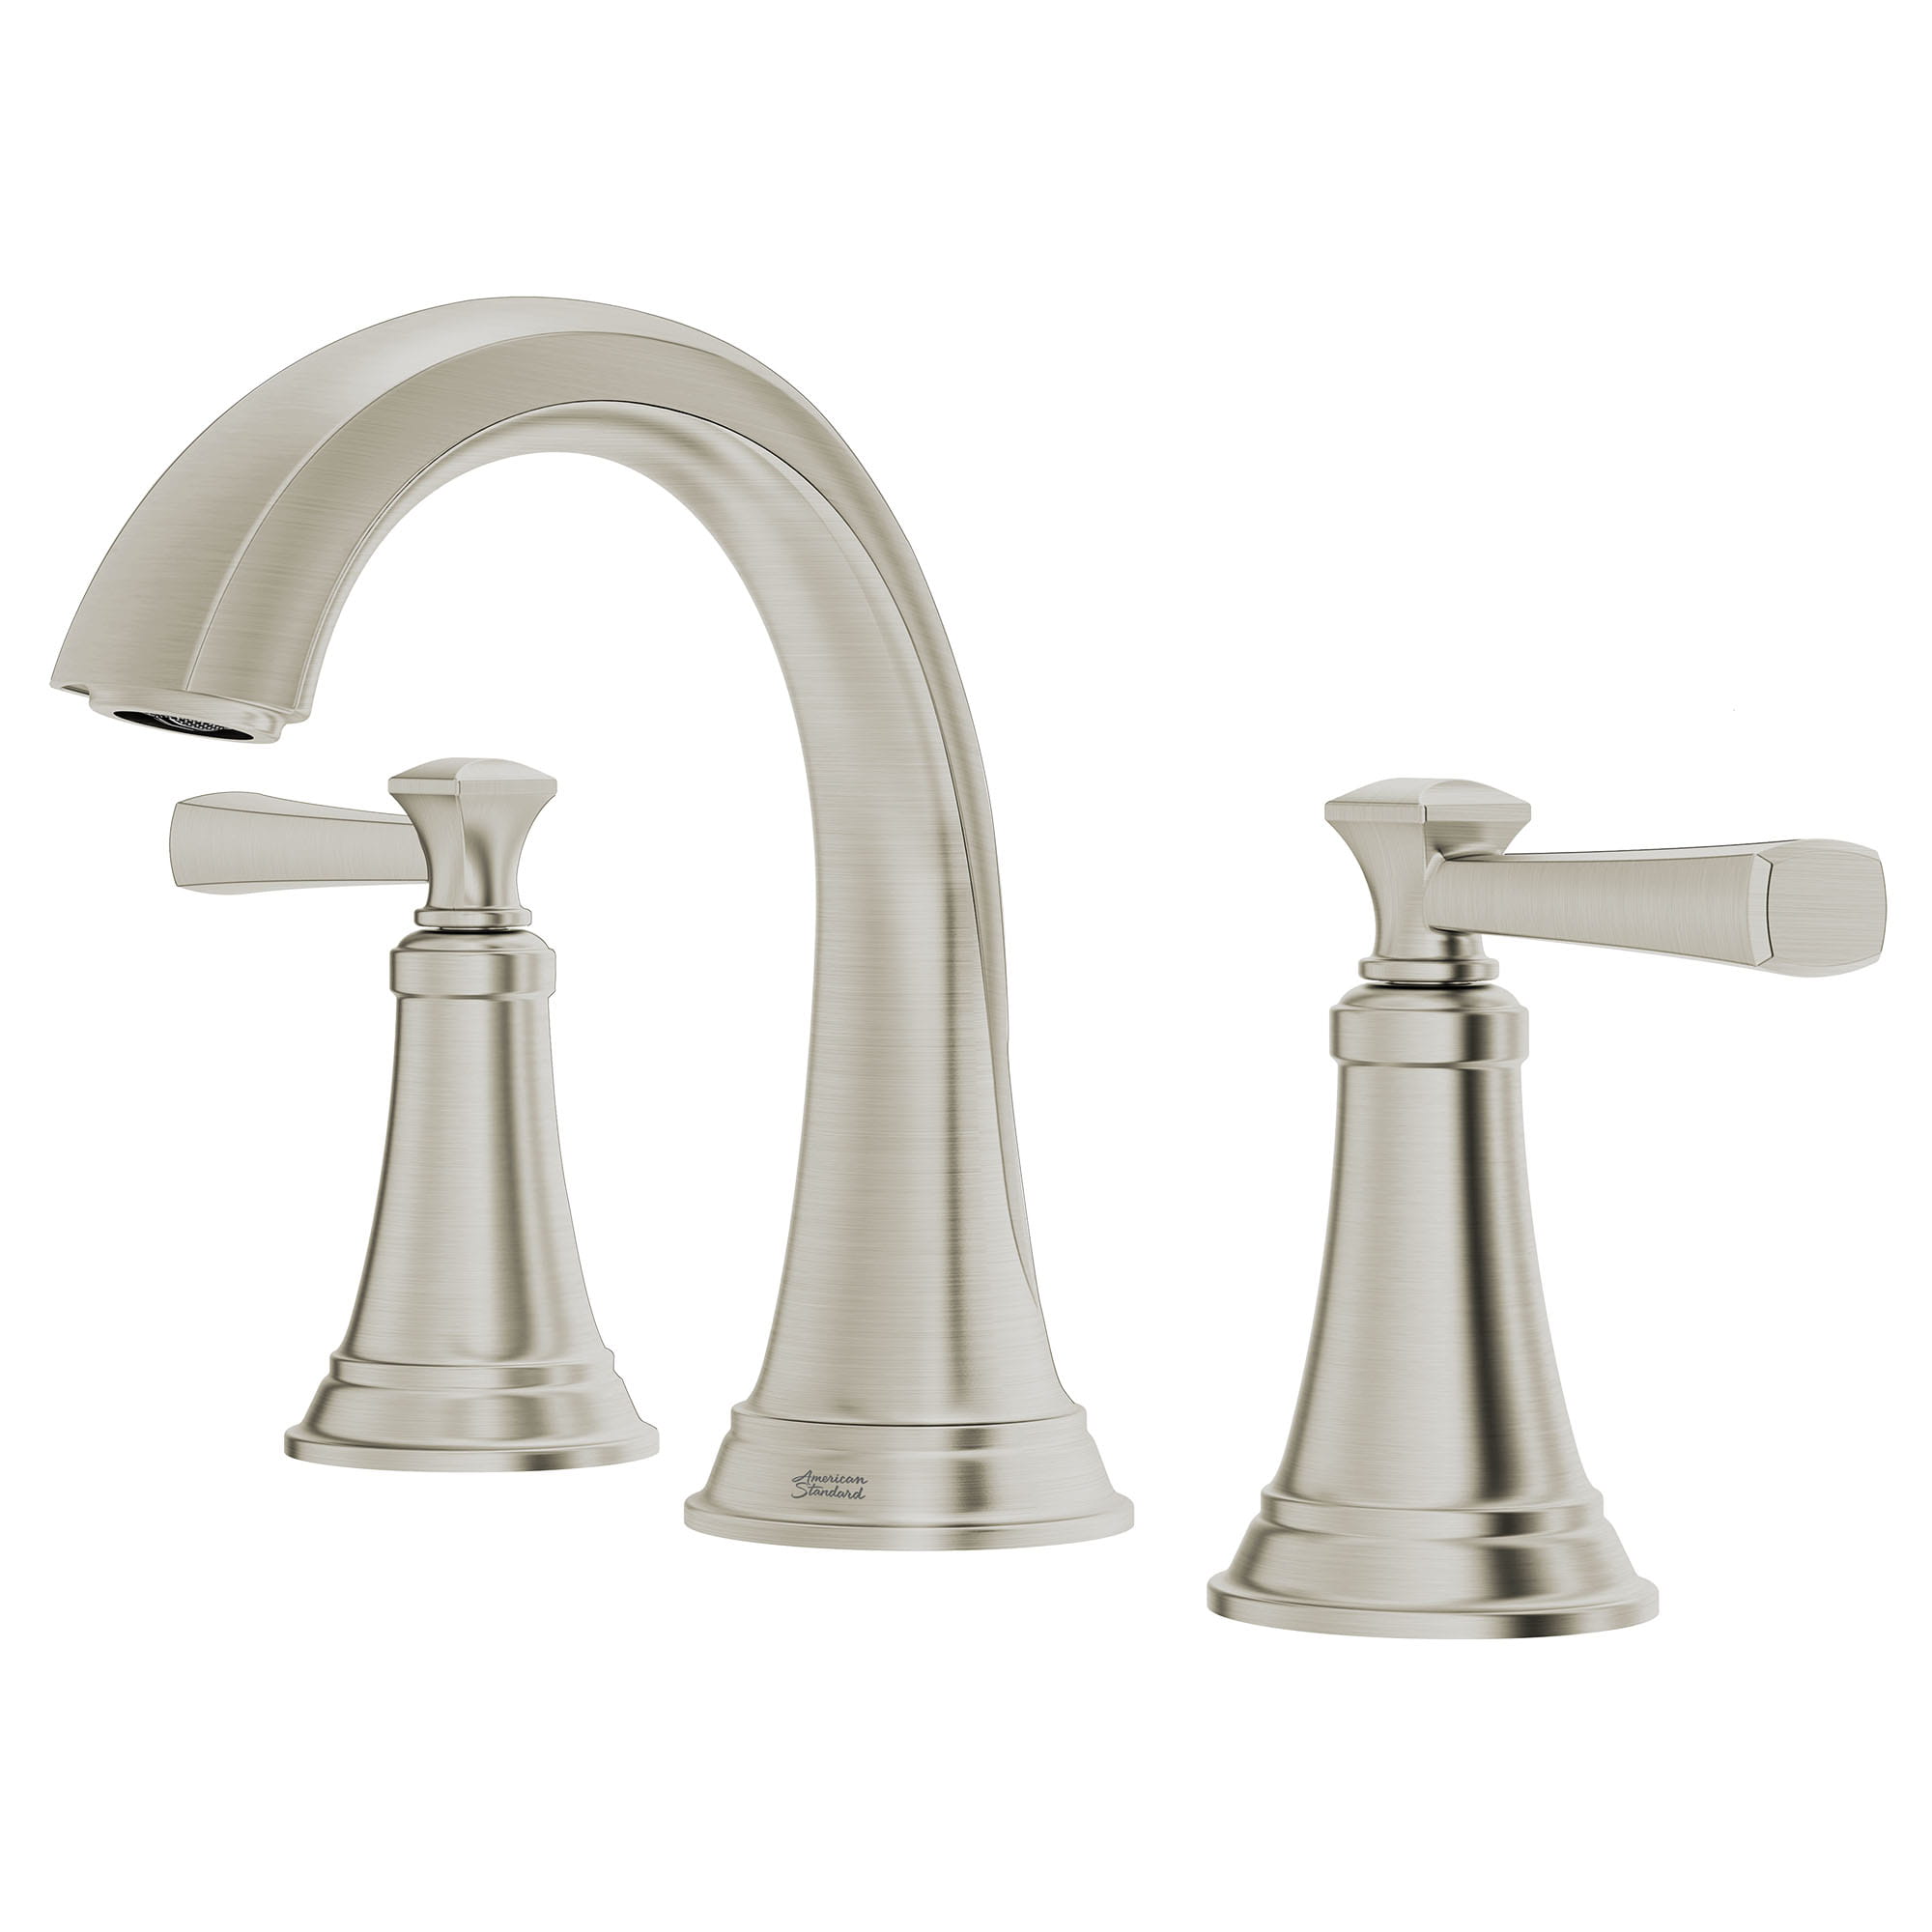 Glenmere 8 Inch Widespread 2 Handle Bathroom Faucet with Metal Drain BRUSHED NICKEL